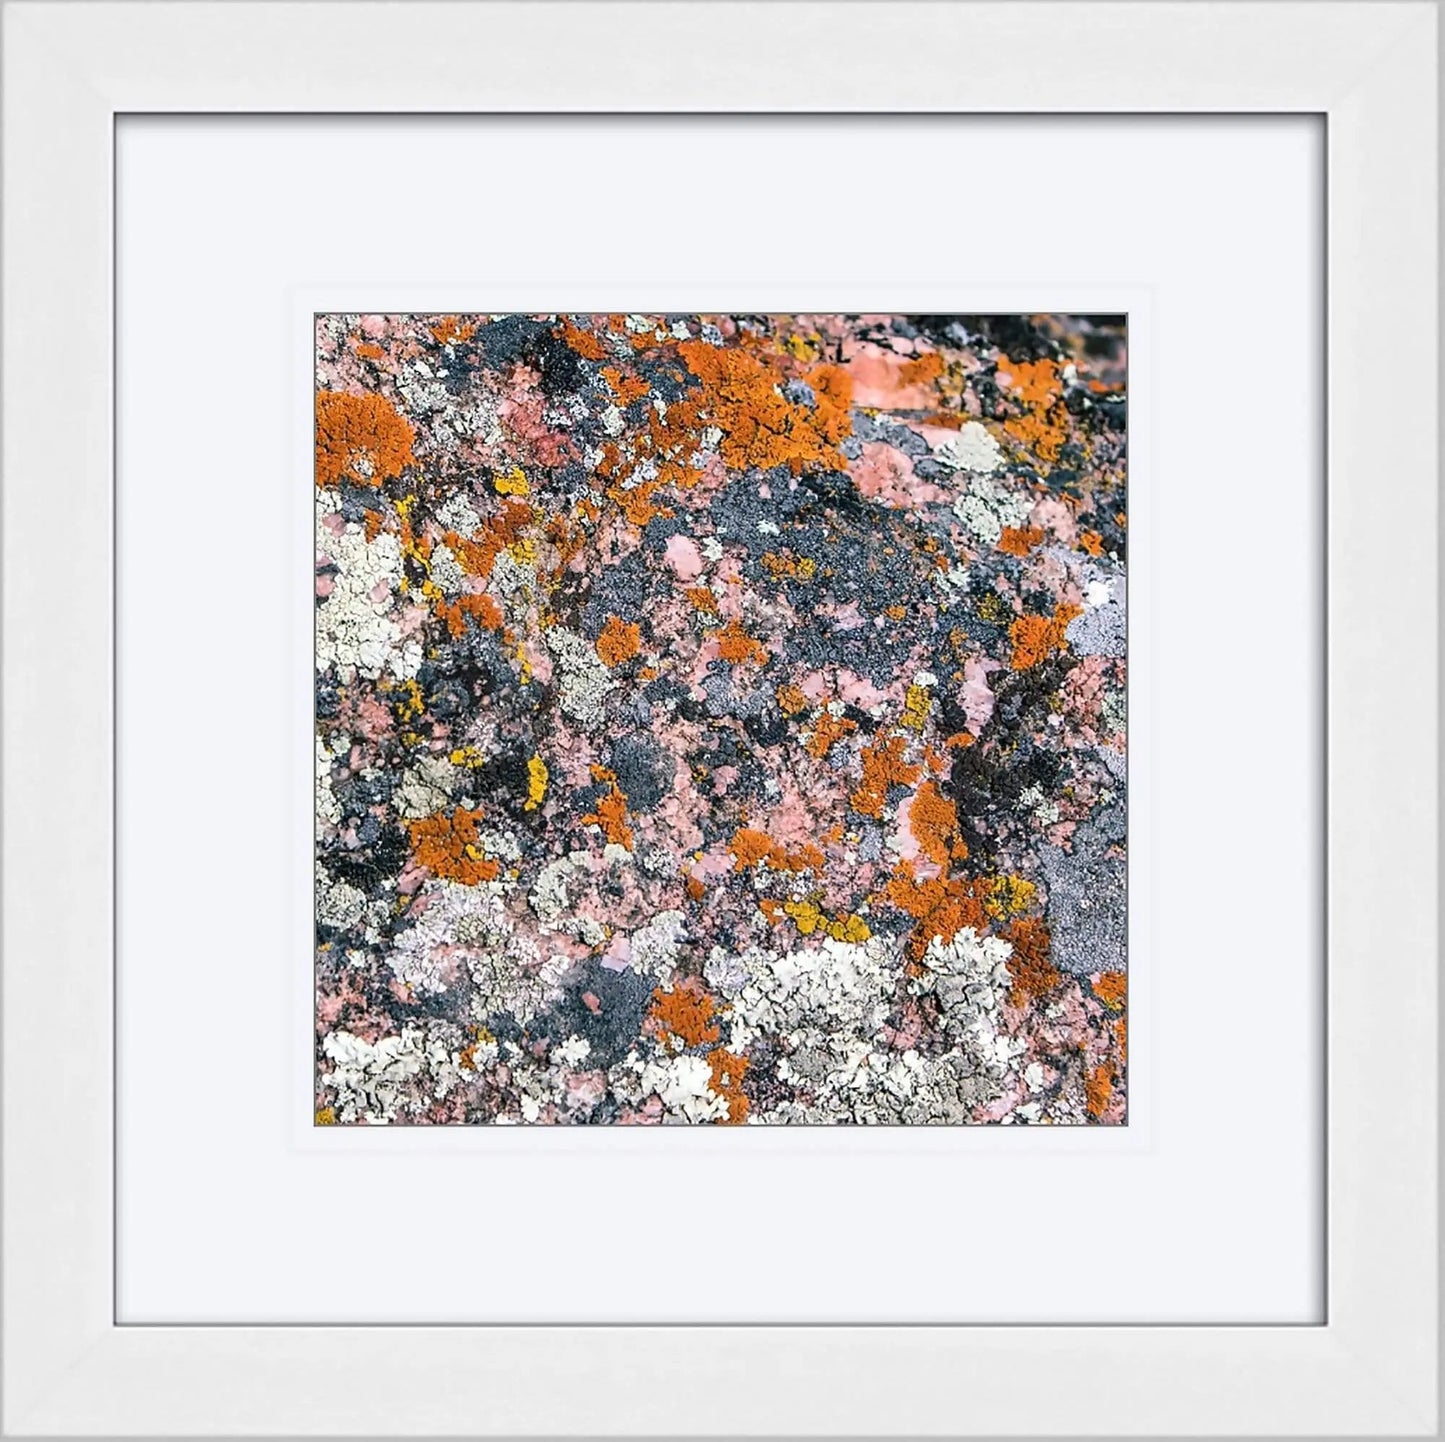 Shell Canyon lichen orange gray pink framed in 12x12 by Lisa Blount